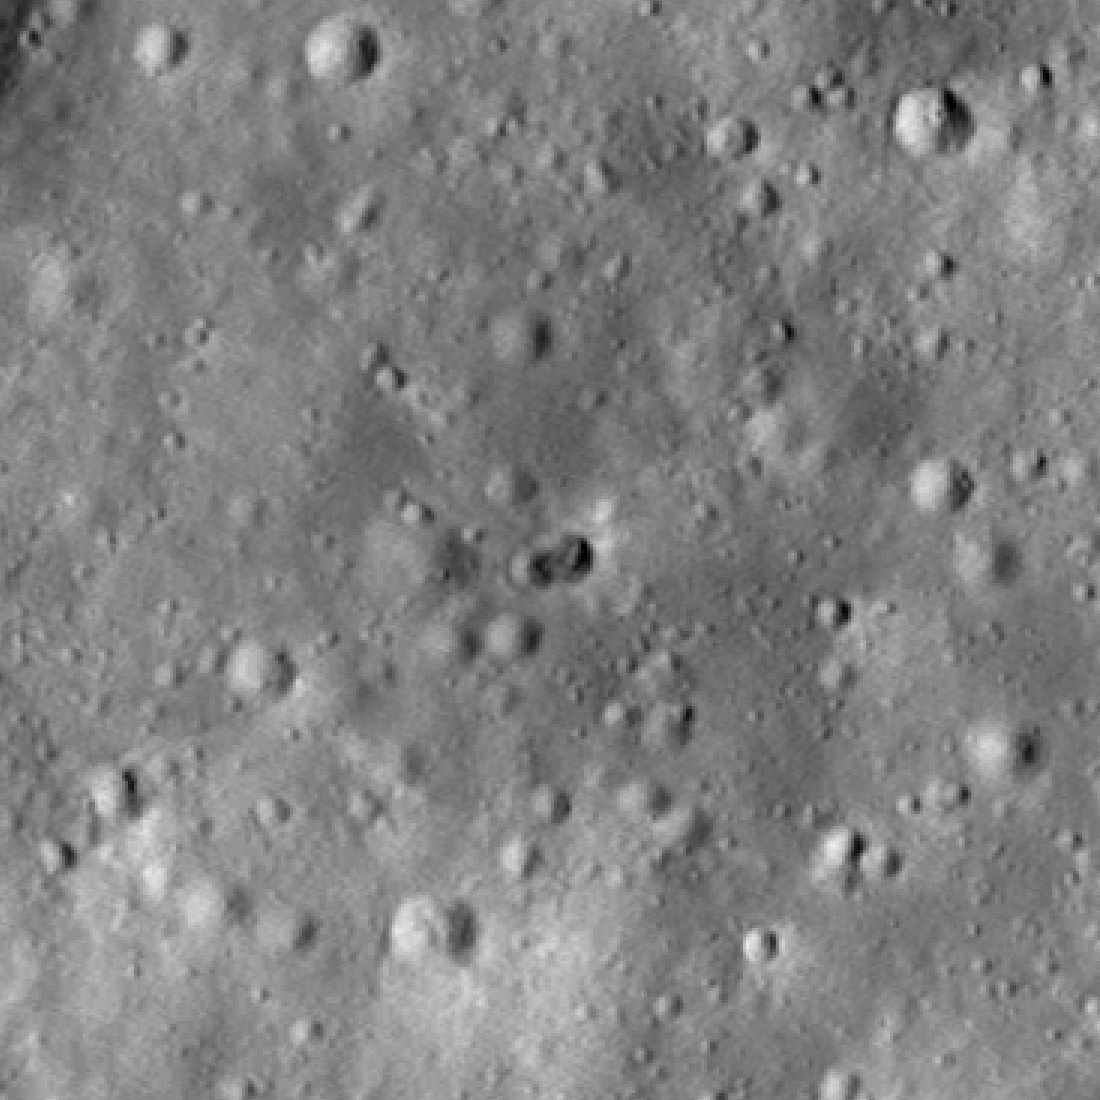 gif showing two images of the lunar surface, new craters are visible in the second one - caused by the rocket crash.